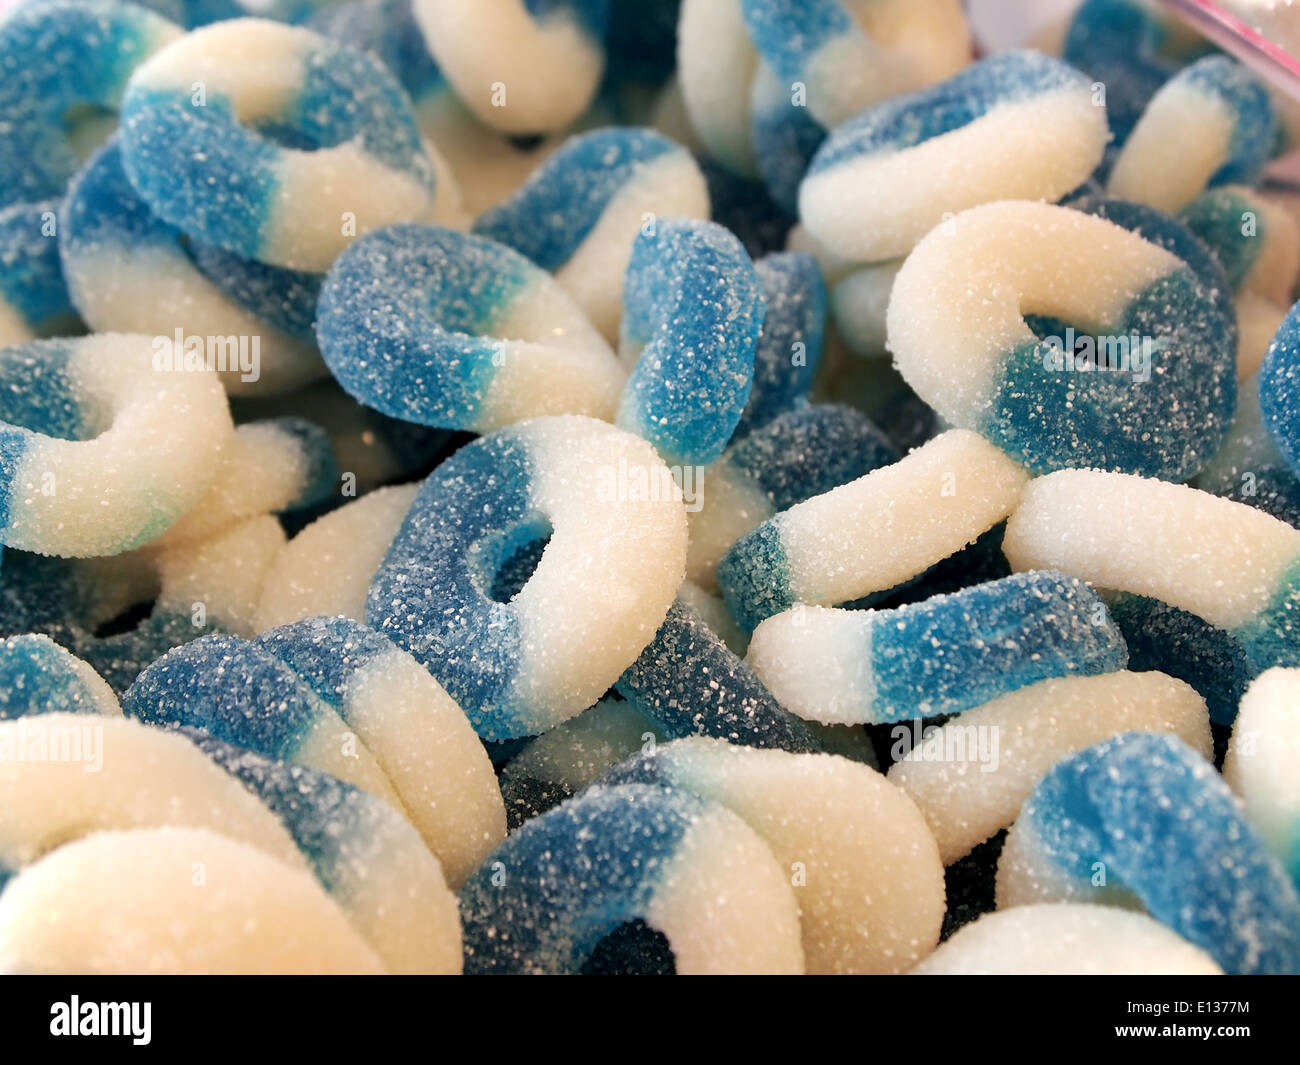 Closeup in a bin of blue raspberry or blueberry gummy fruit ring candy with crystallized sugar coating. Stock Photo